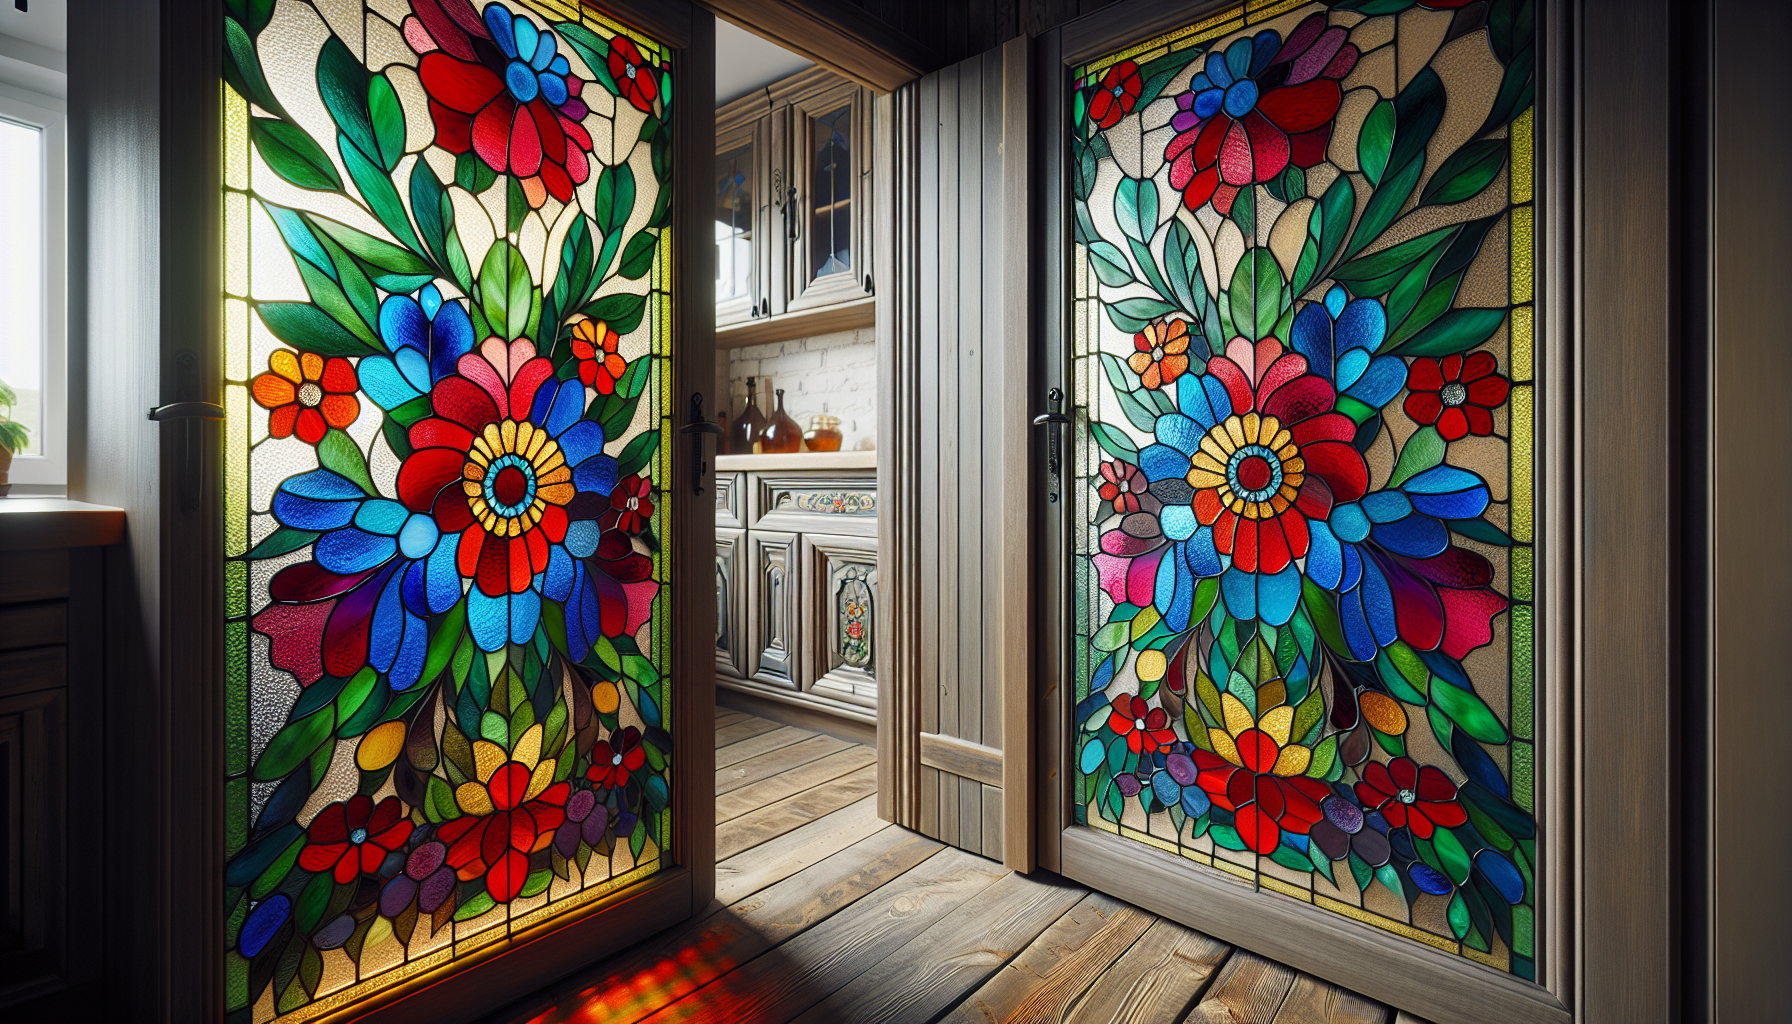 Stained glass design on a pantry door